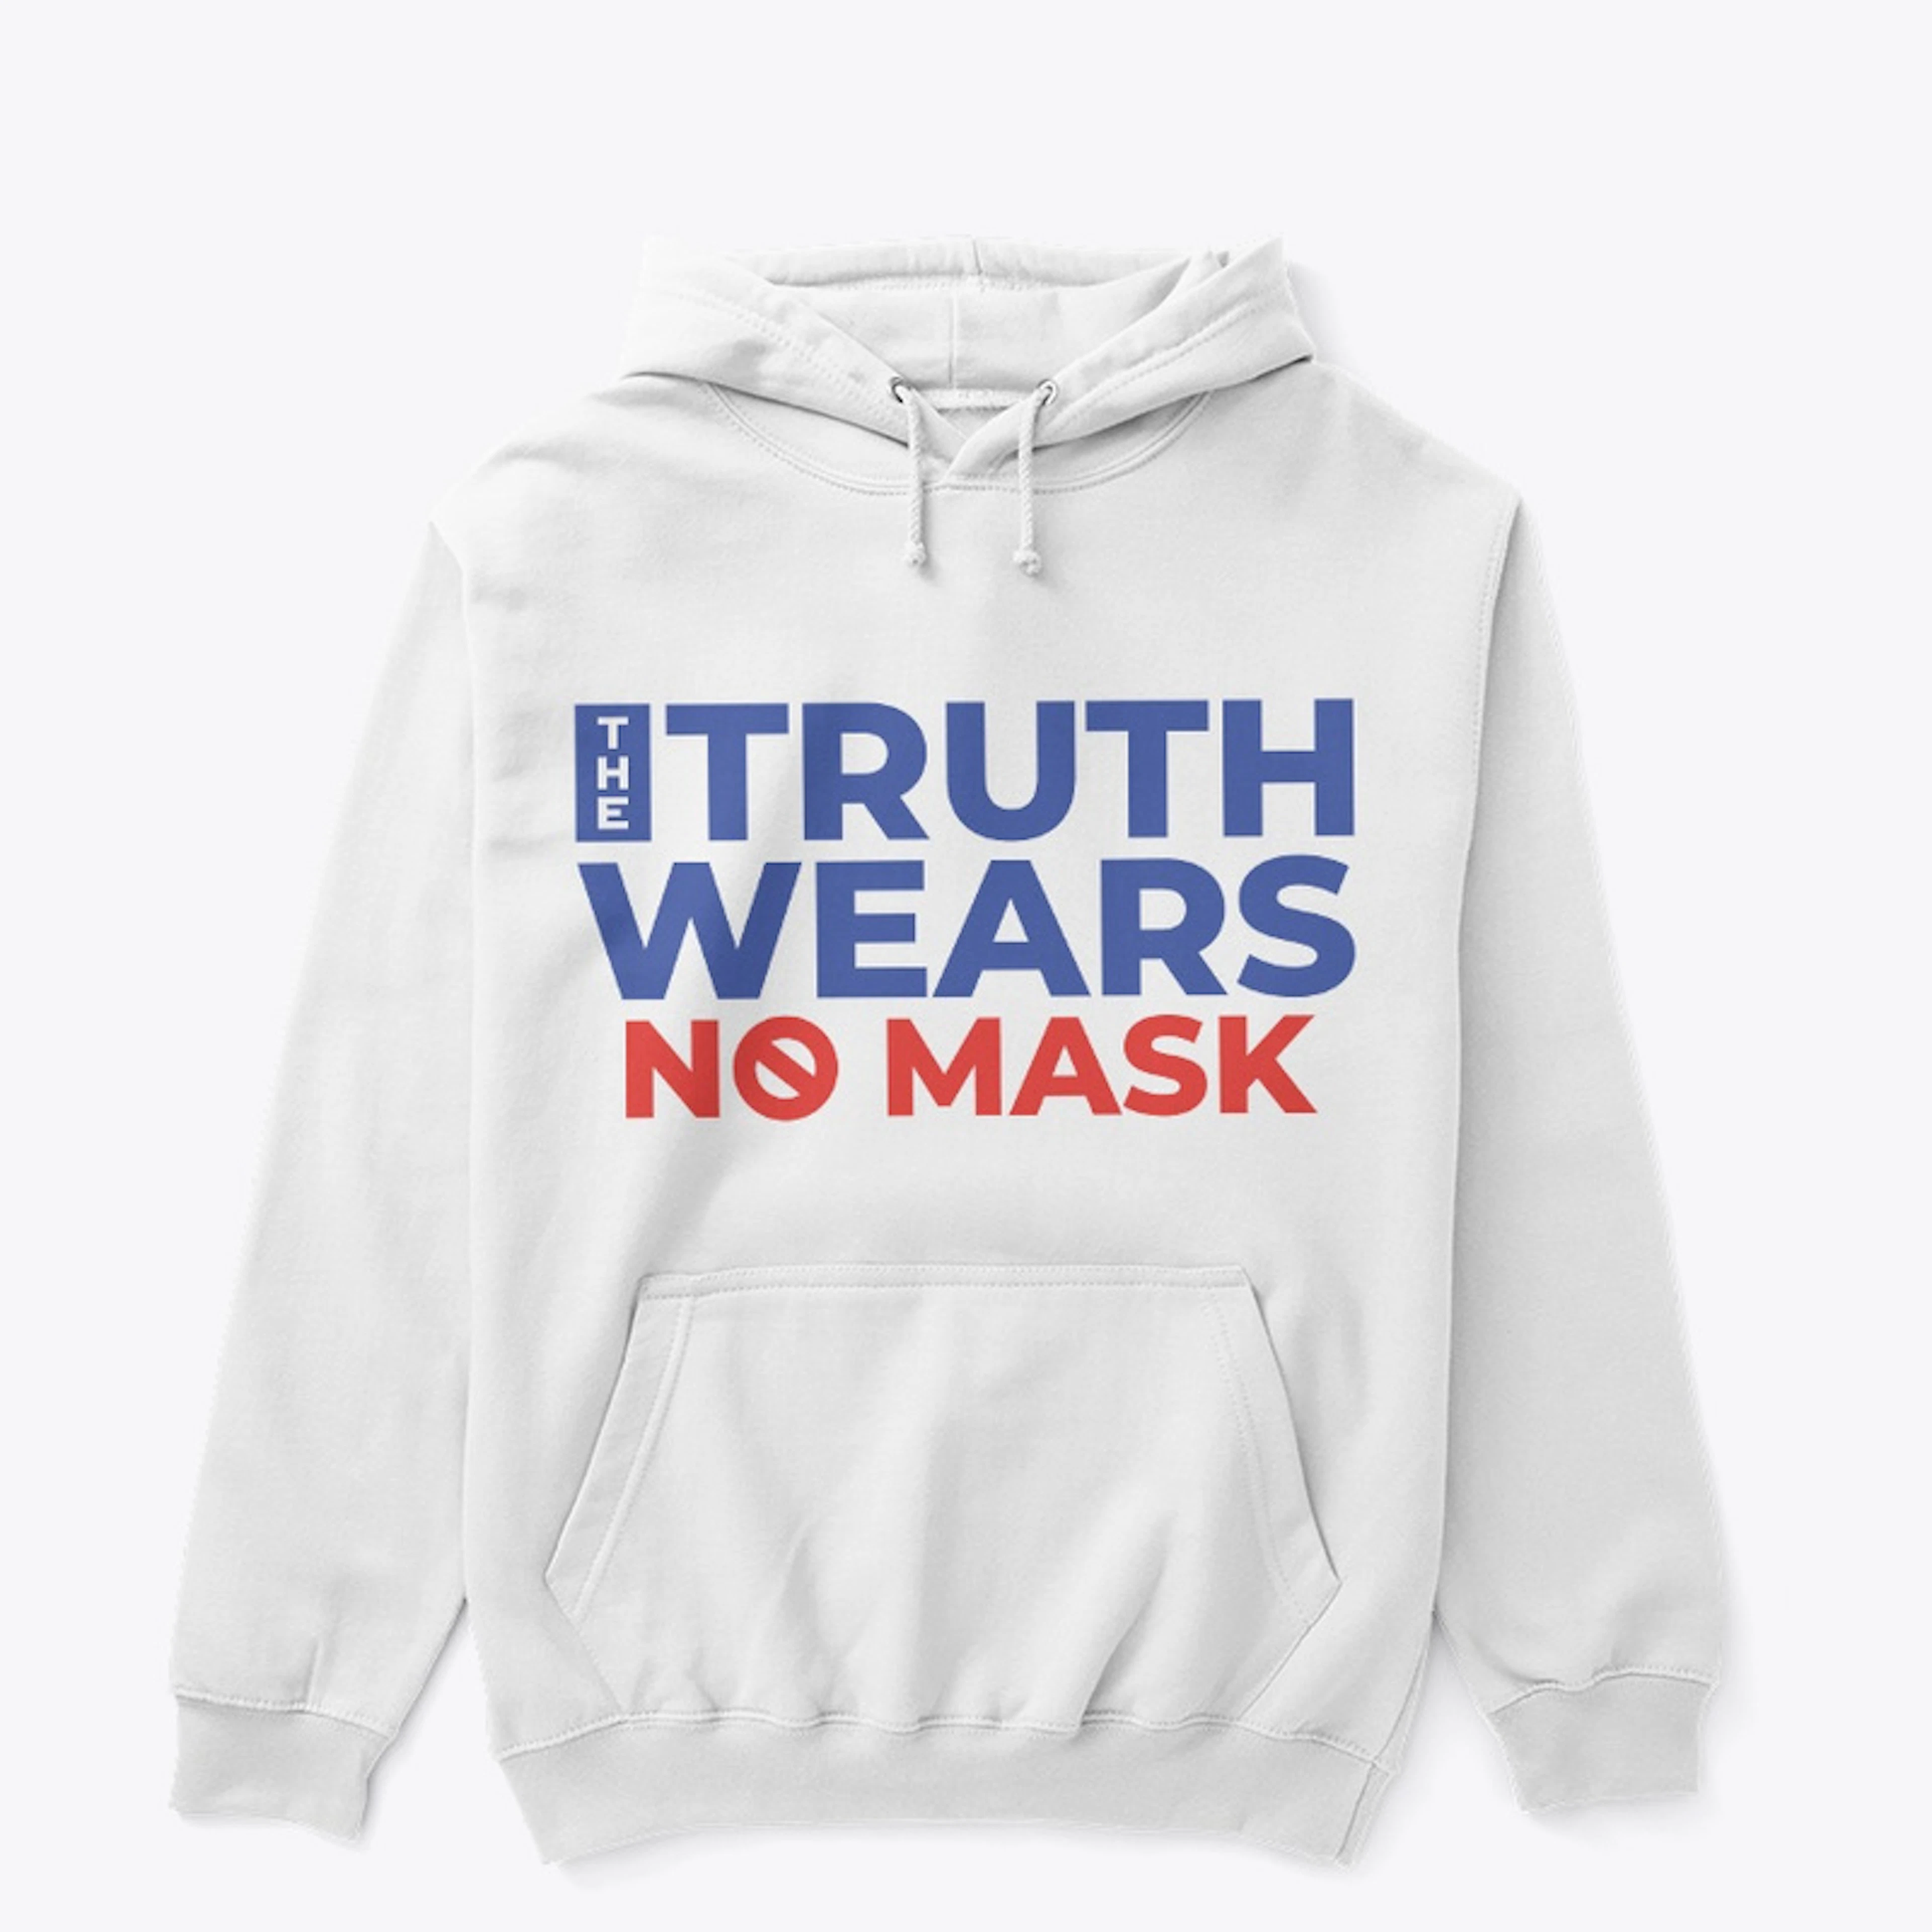 The Truth Wears No Mask